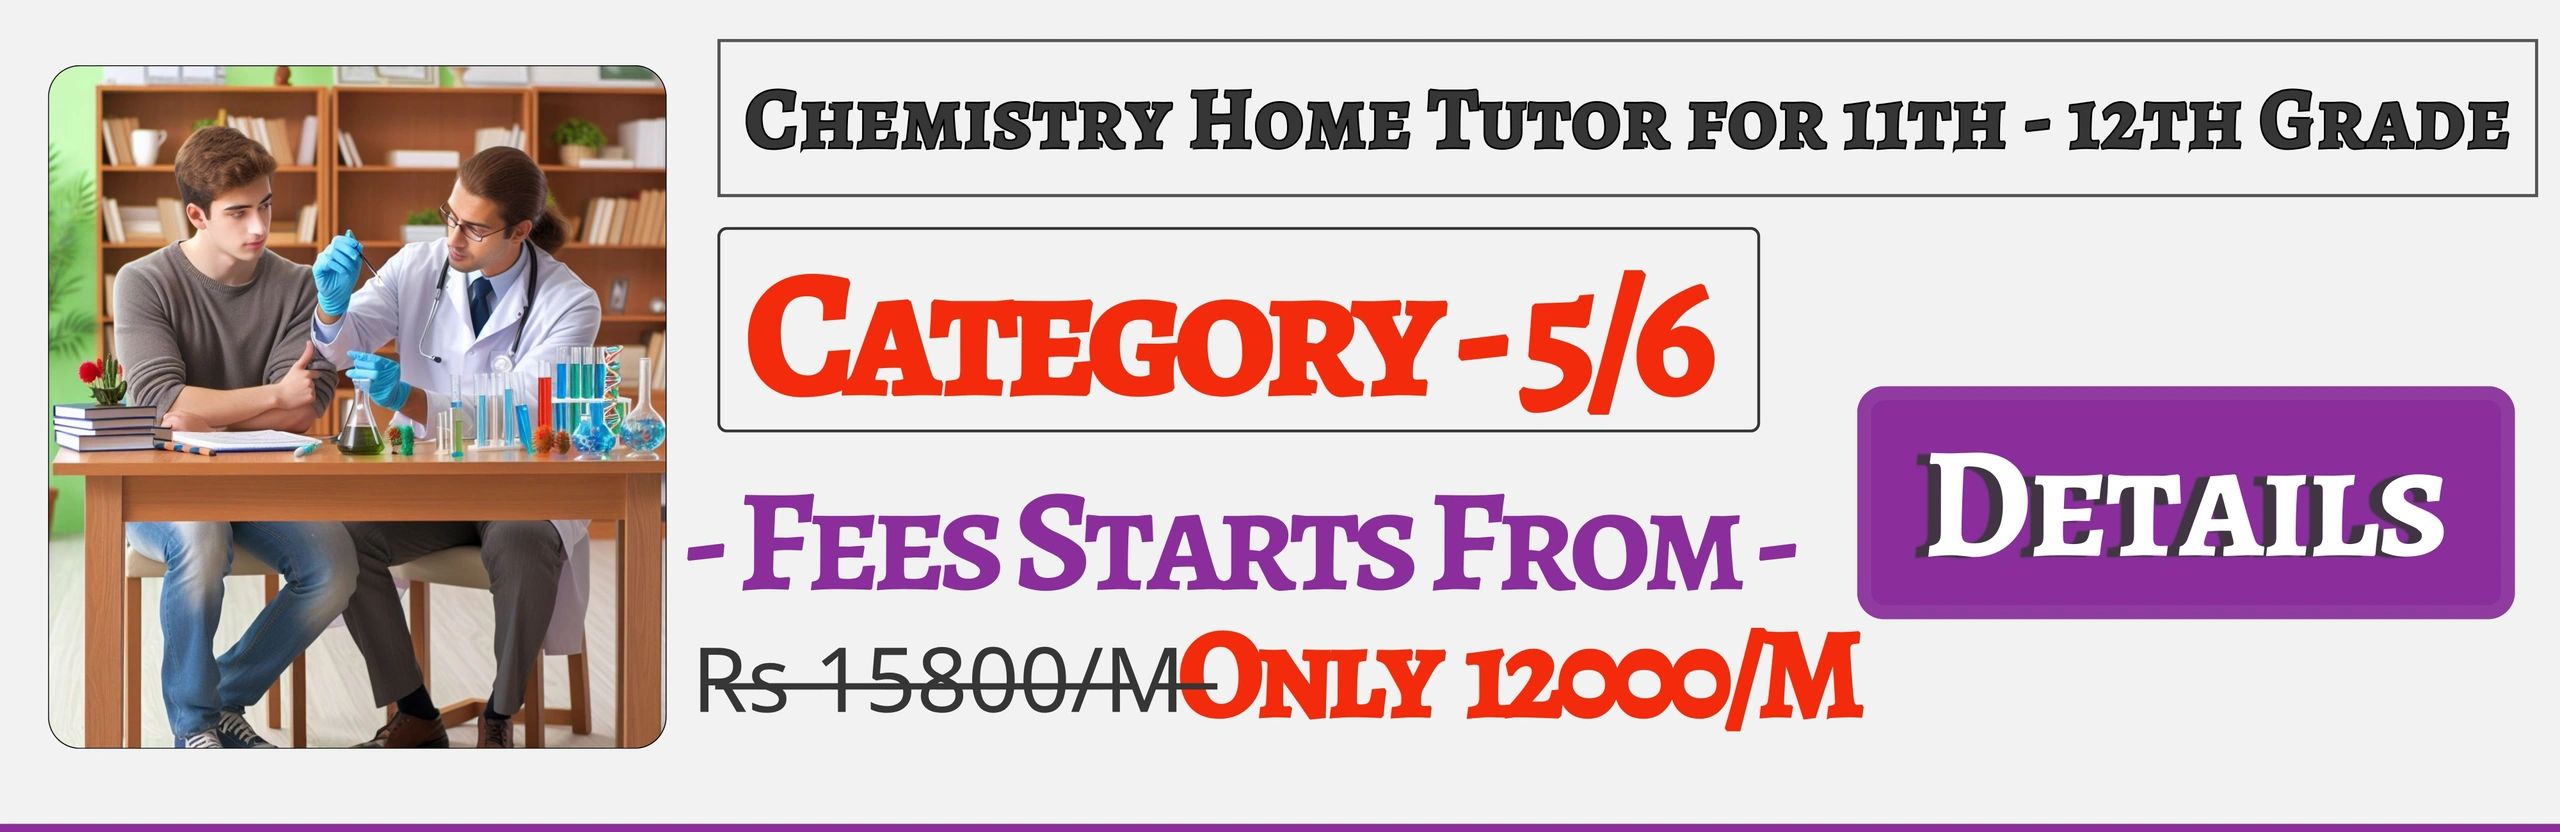 Book Best Nearby Chemistry Home Tuition Tutors For 11th & 12th In Jaipur , Fees Only 12000/M